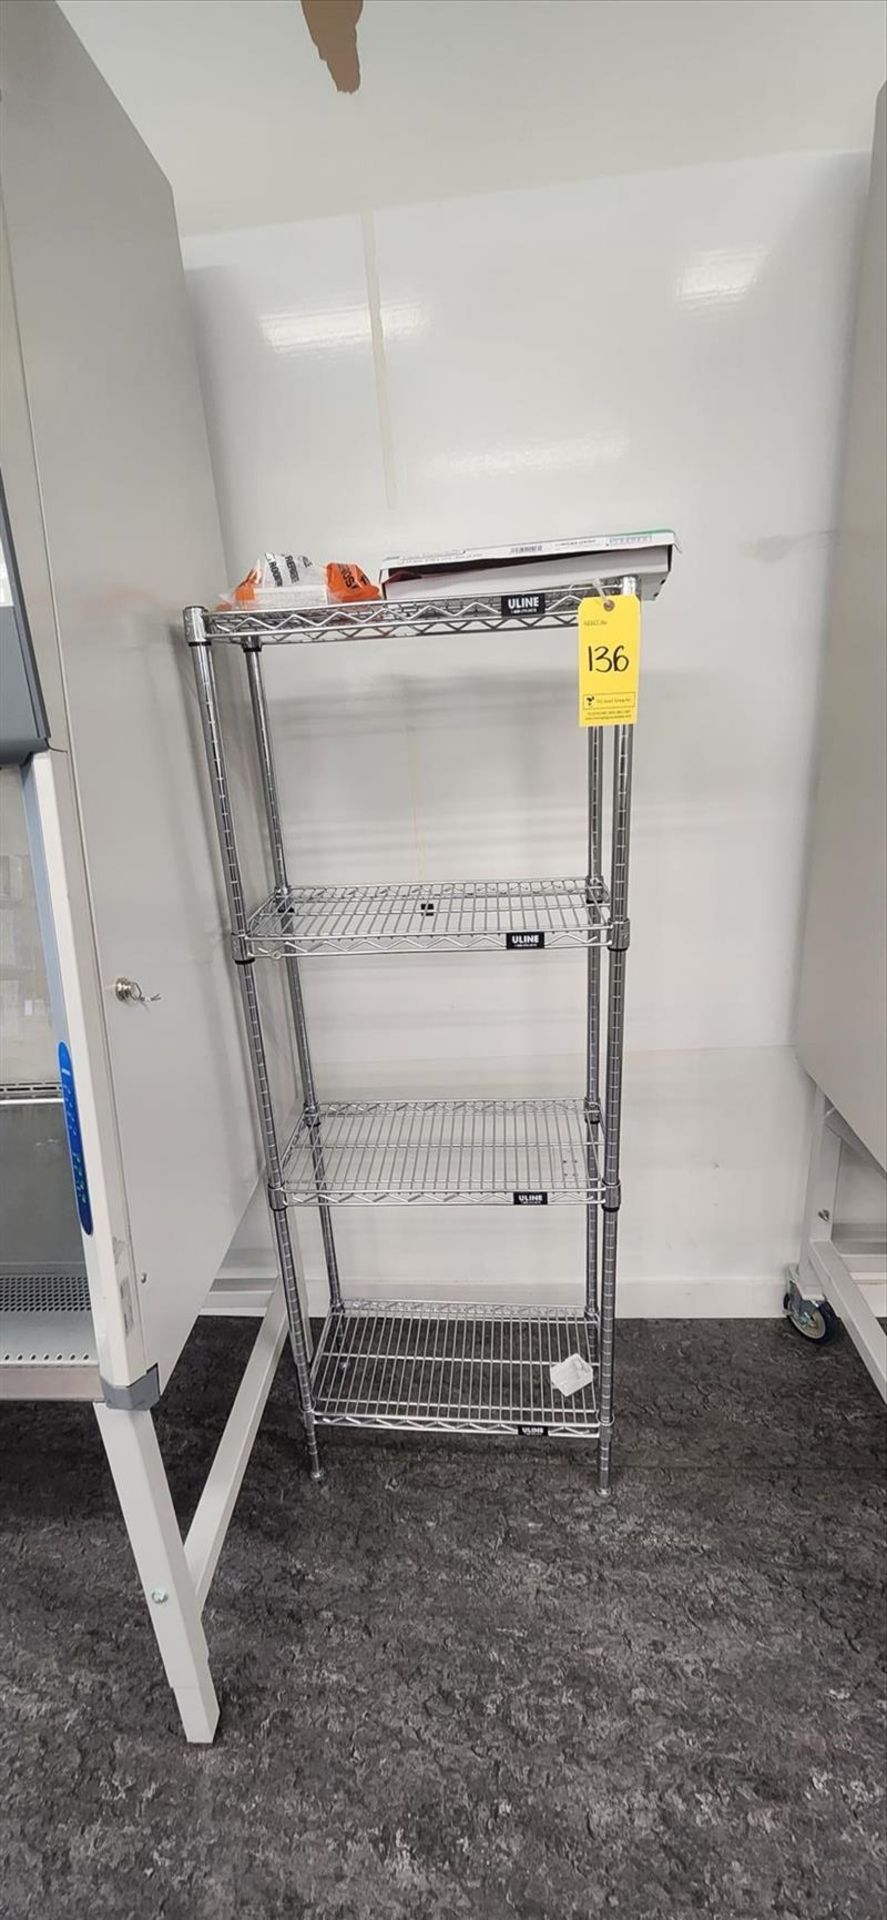 Uline Wire Rack approx. 12 in. x 23 in. x 63 in. height